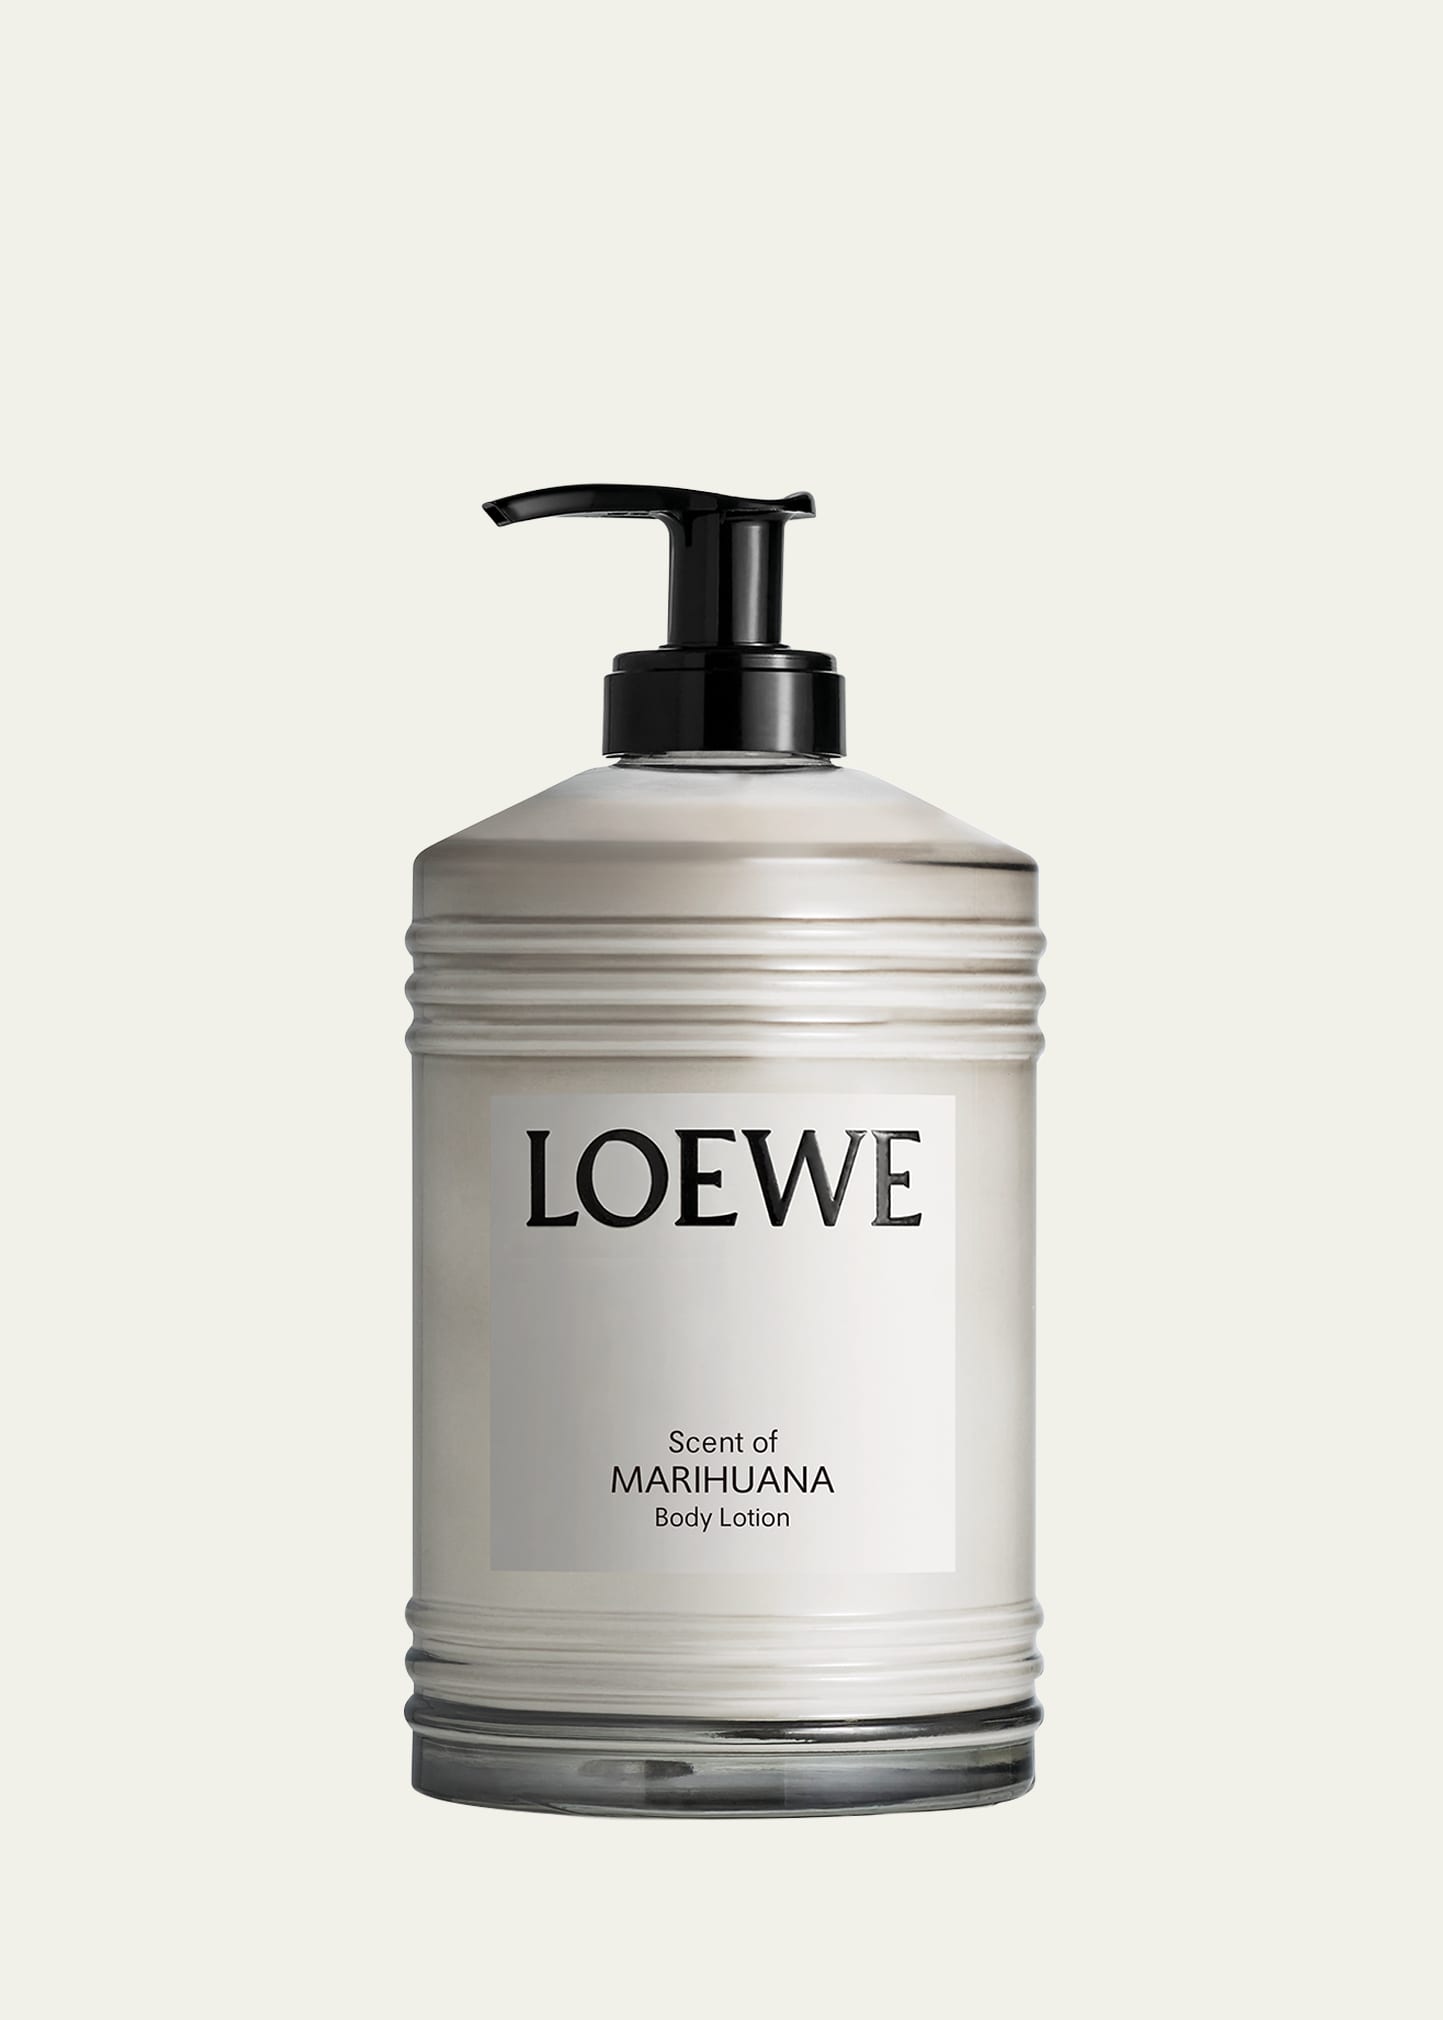 Loewe Scent Of Marihuana Body Lotion, 12 Oz. In White